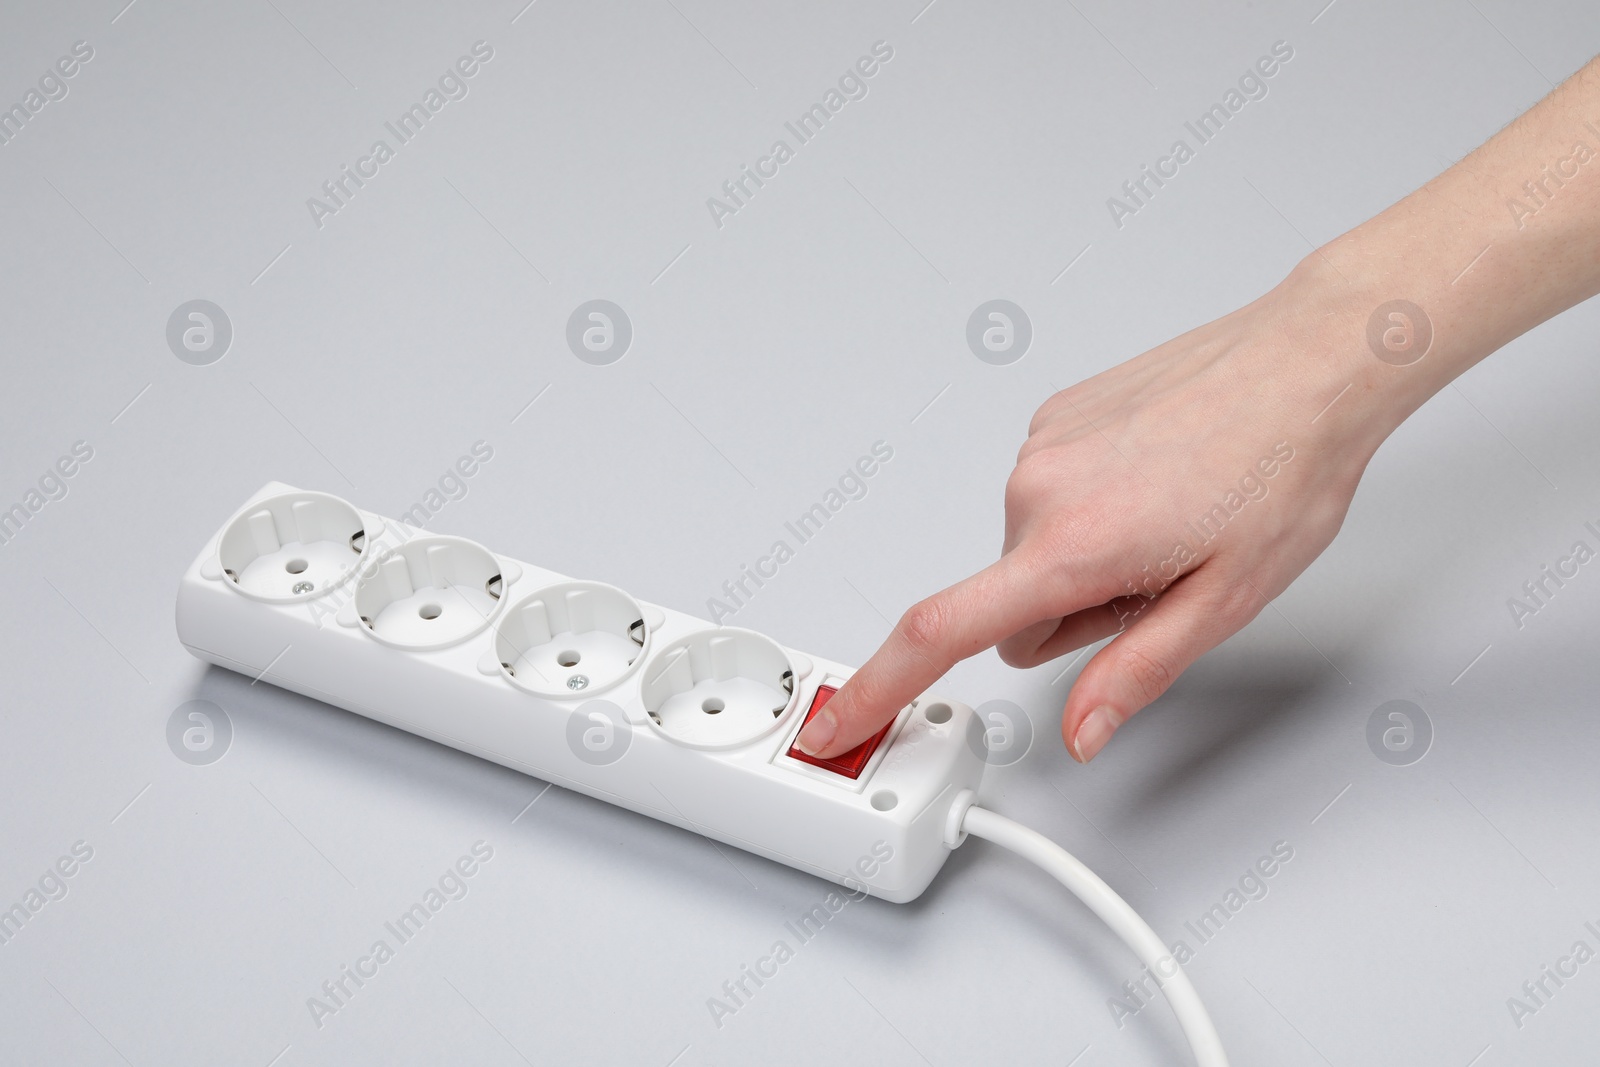 Photo of Woman pressing power button of extension cord on white background, closeup. Electrician's equipment